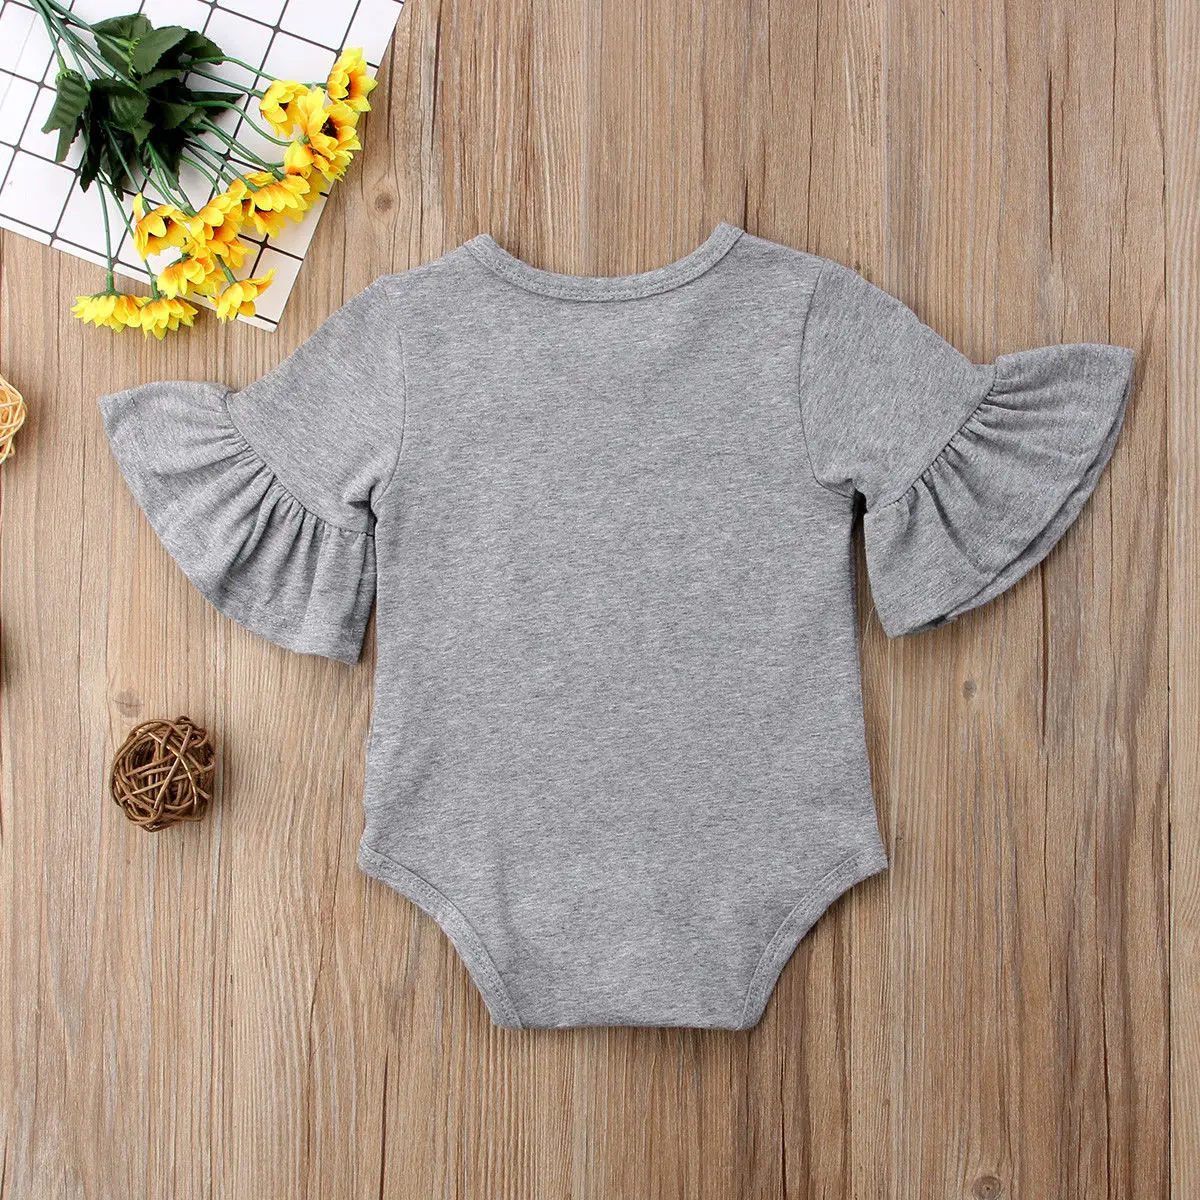 3 Color Newborn Infant Baby Girl Clothes Flared Sleeve Romper Brife Jumpsuit Sunsuit Outfits